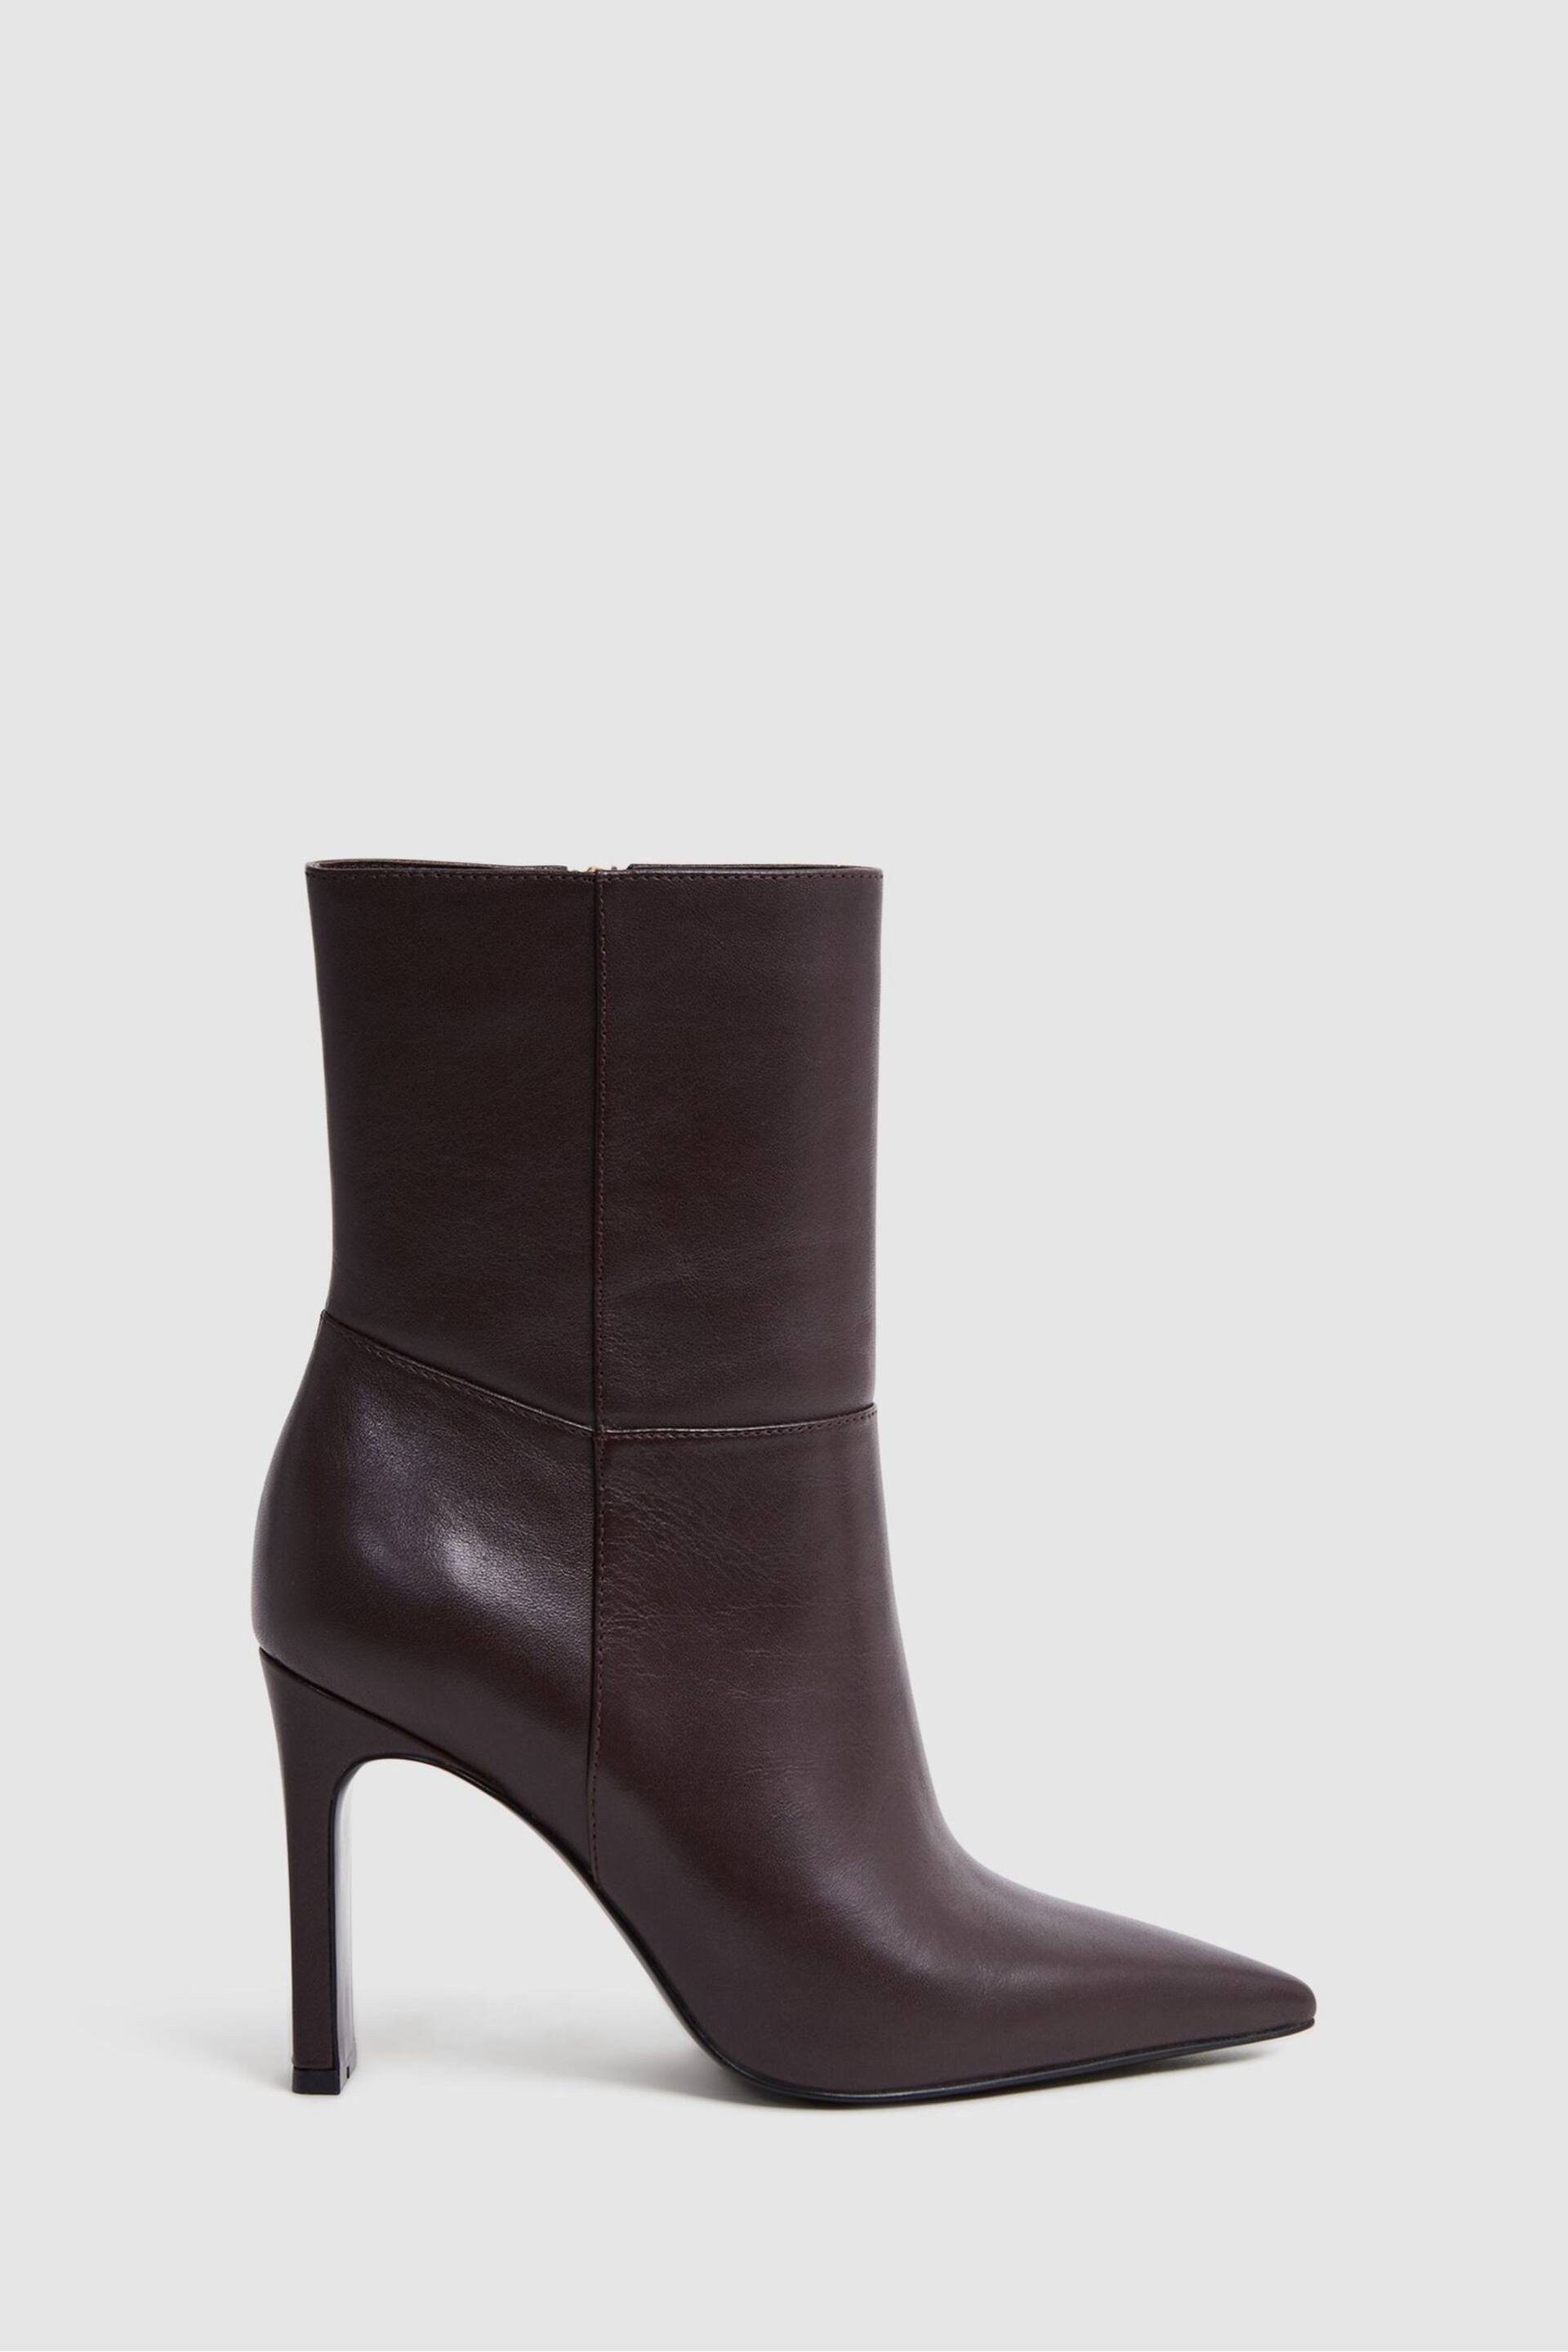 Reiss Burgundy Vanessa Leather Heeled Ankle Boots - Image 1 of 5